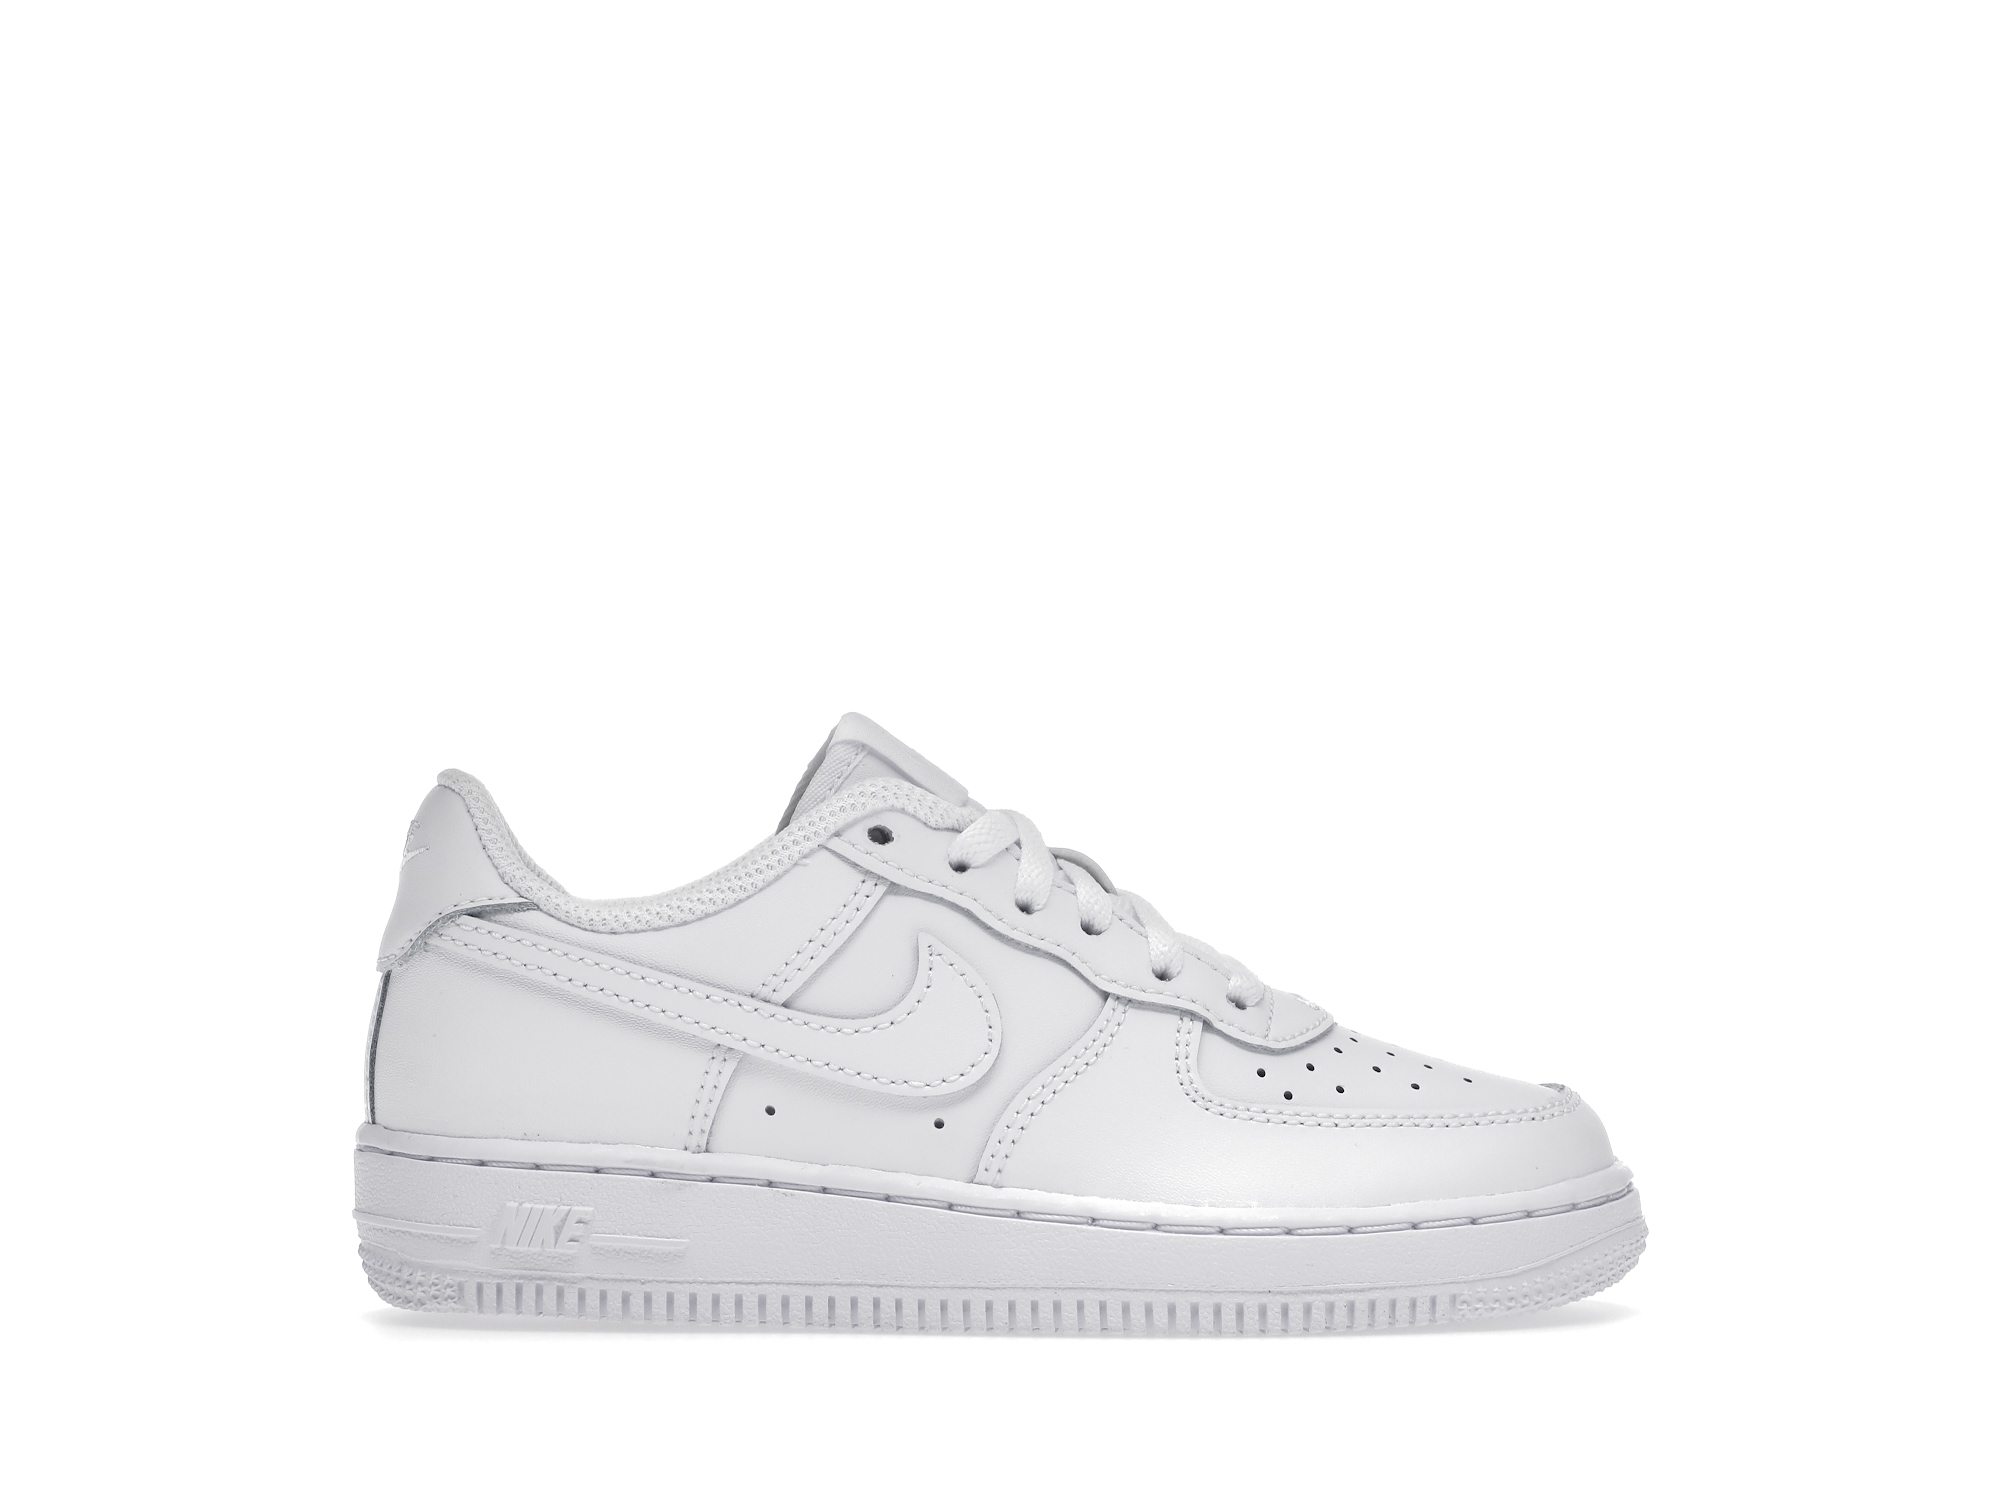 Nike Air Force 1 Low LE Triple White (PS) Kids' - DH2925-111 - US